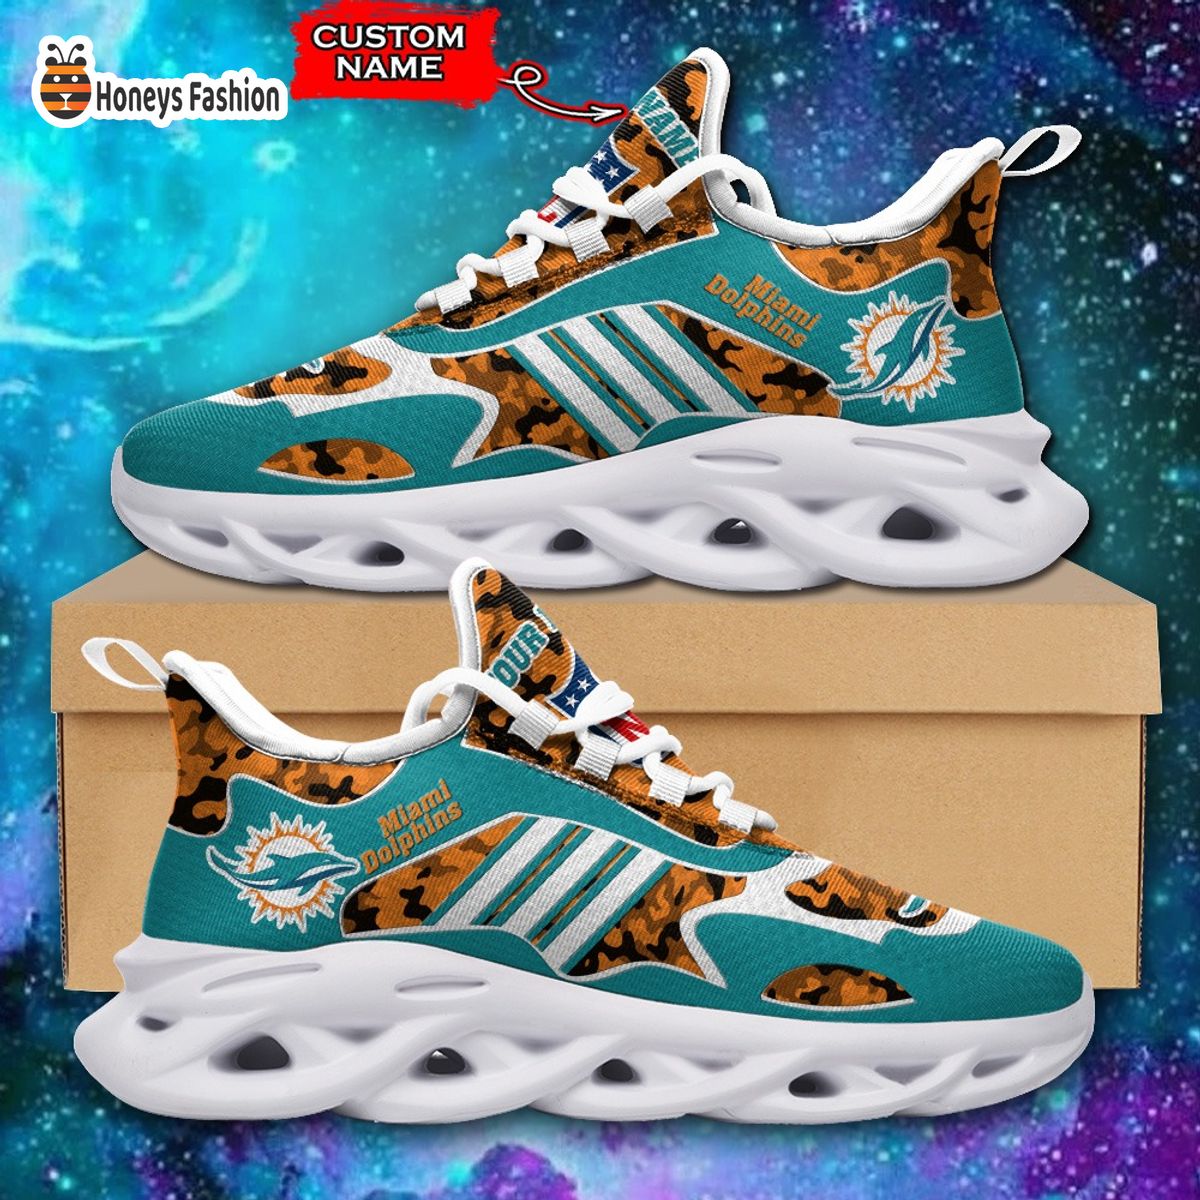 Miami Dolphins NFL Adidas Personalized Max Soul Shoes